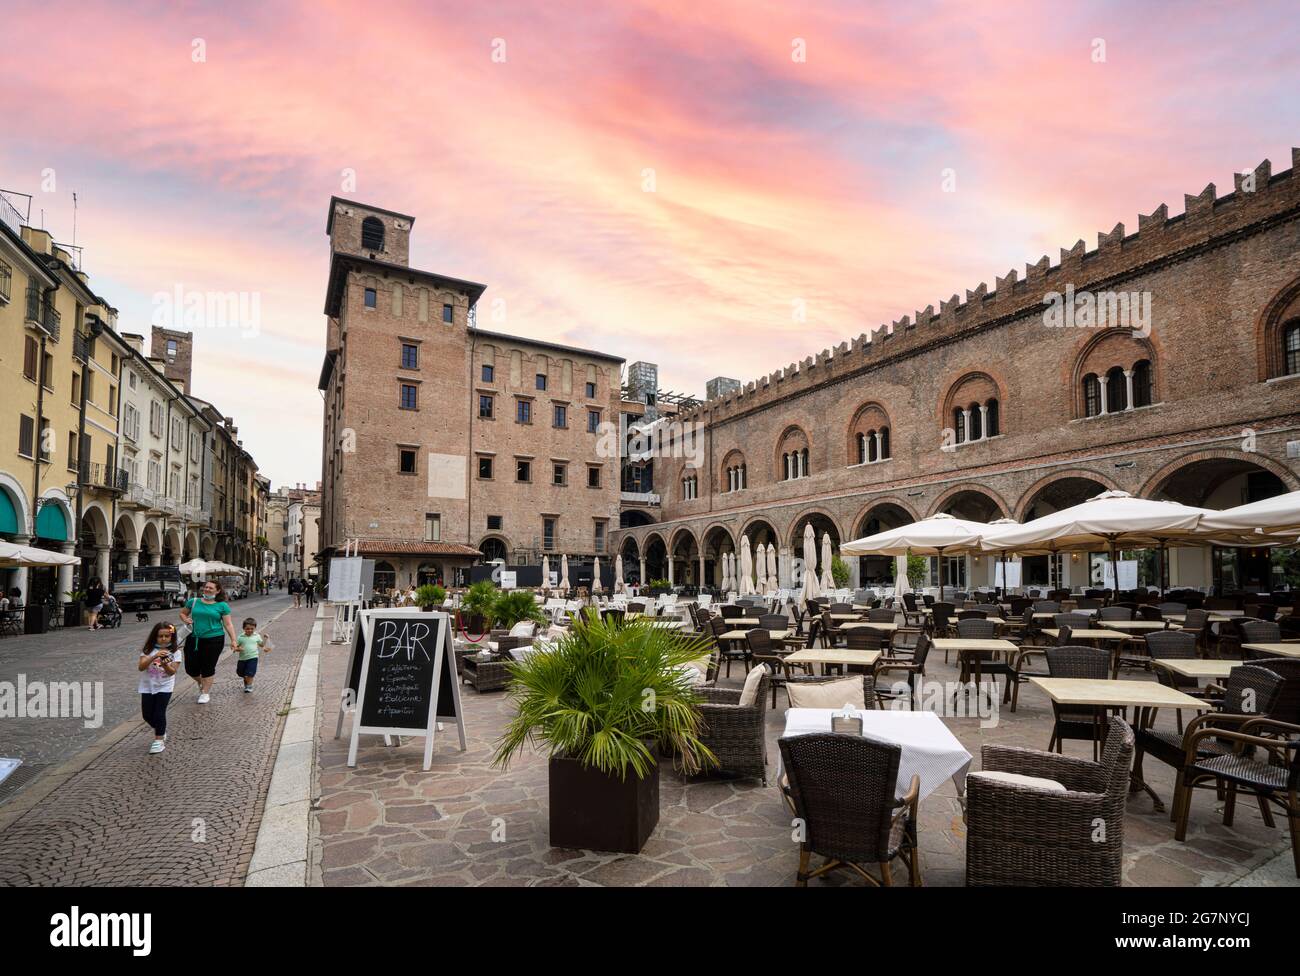 Mantua, Italy. July 13, 2021.   View of the Piazza delle Erbe in the city center Stock Photo